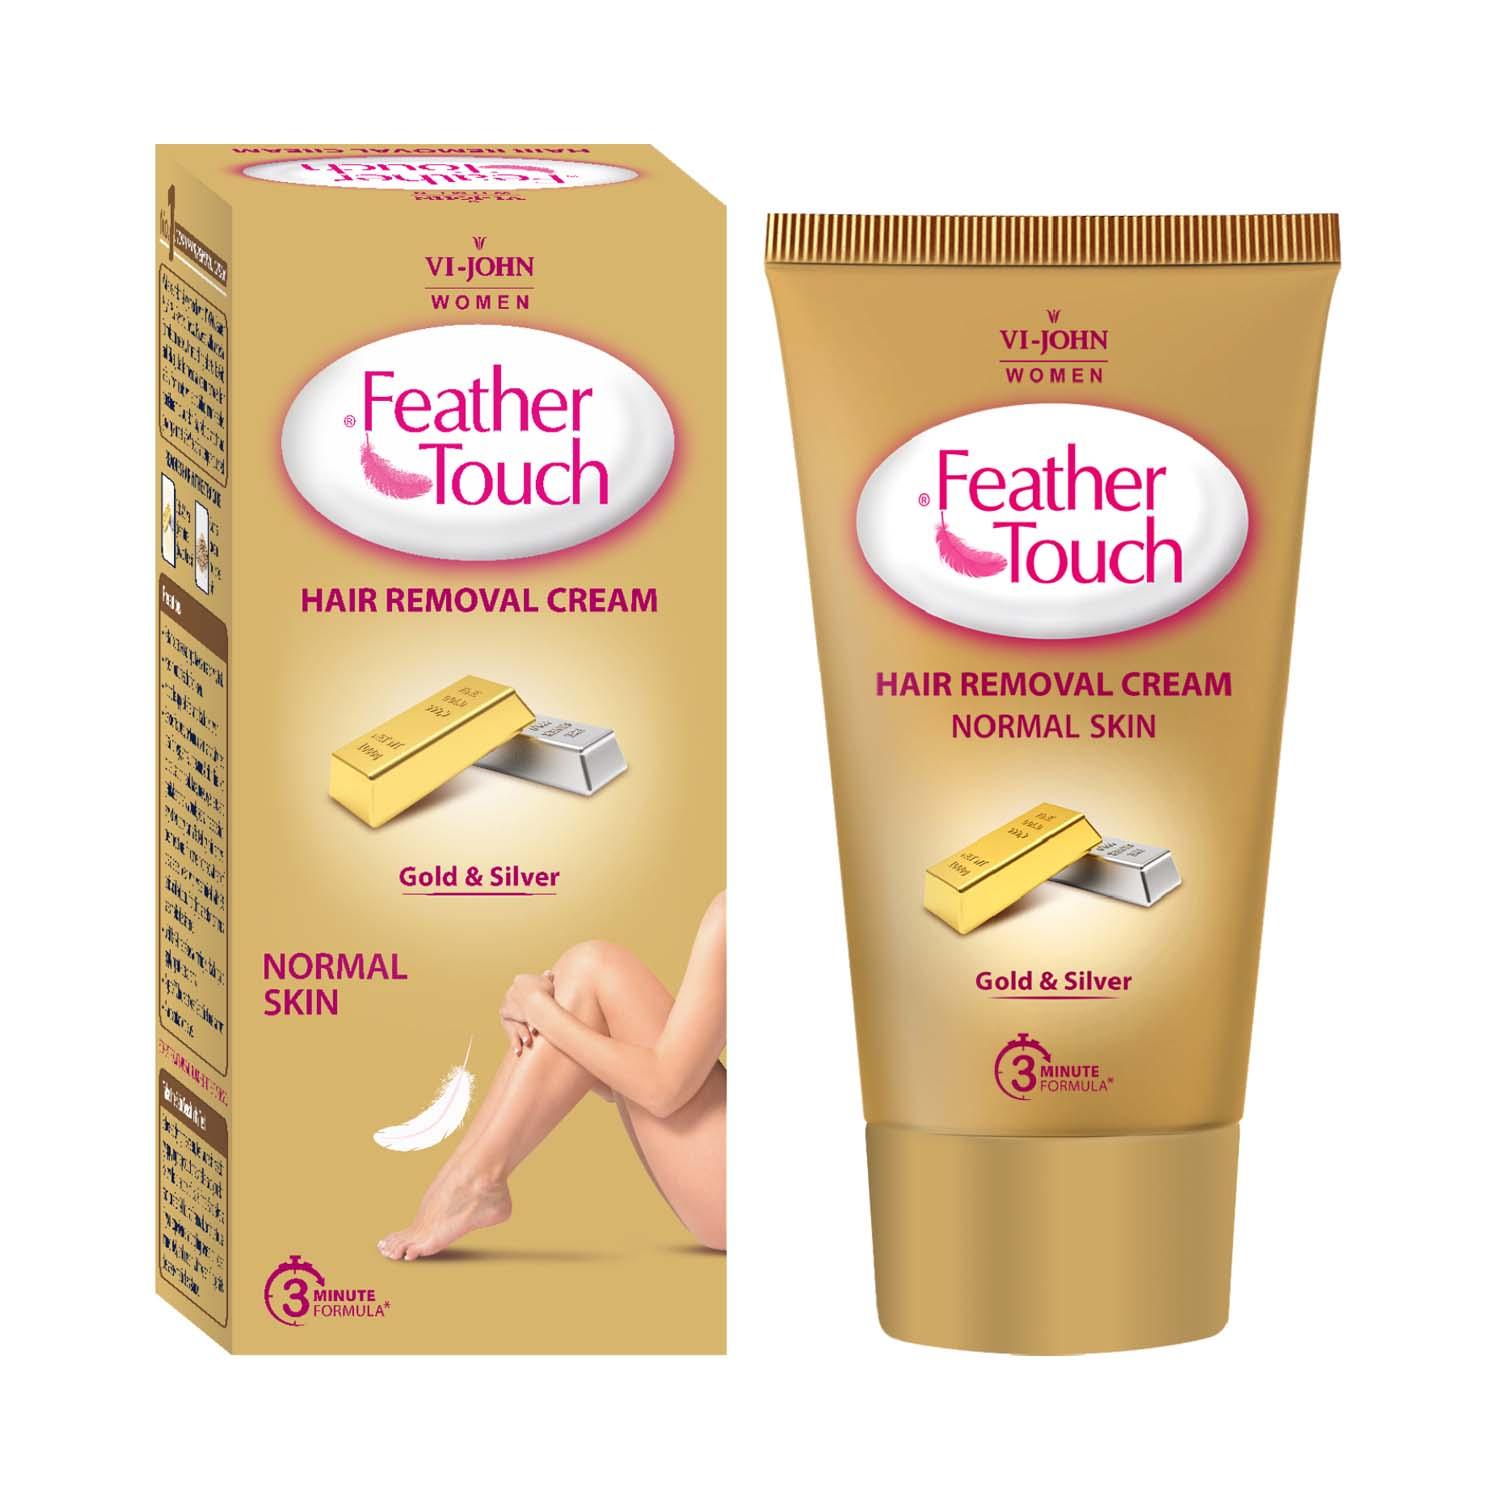 VI-JOHN | VI-JOHN Feather Touch Gold & Silver Hair Removal Cream for Normal Skin (40g)